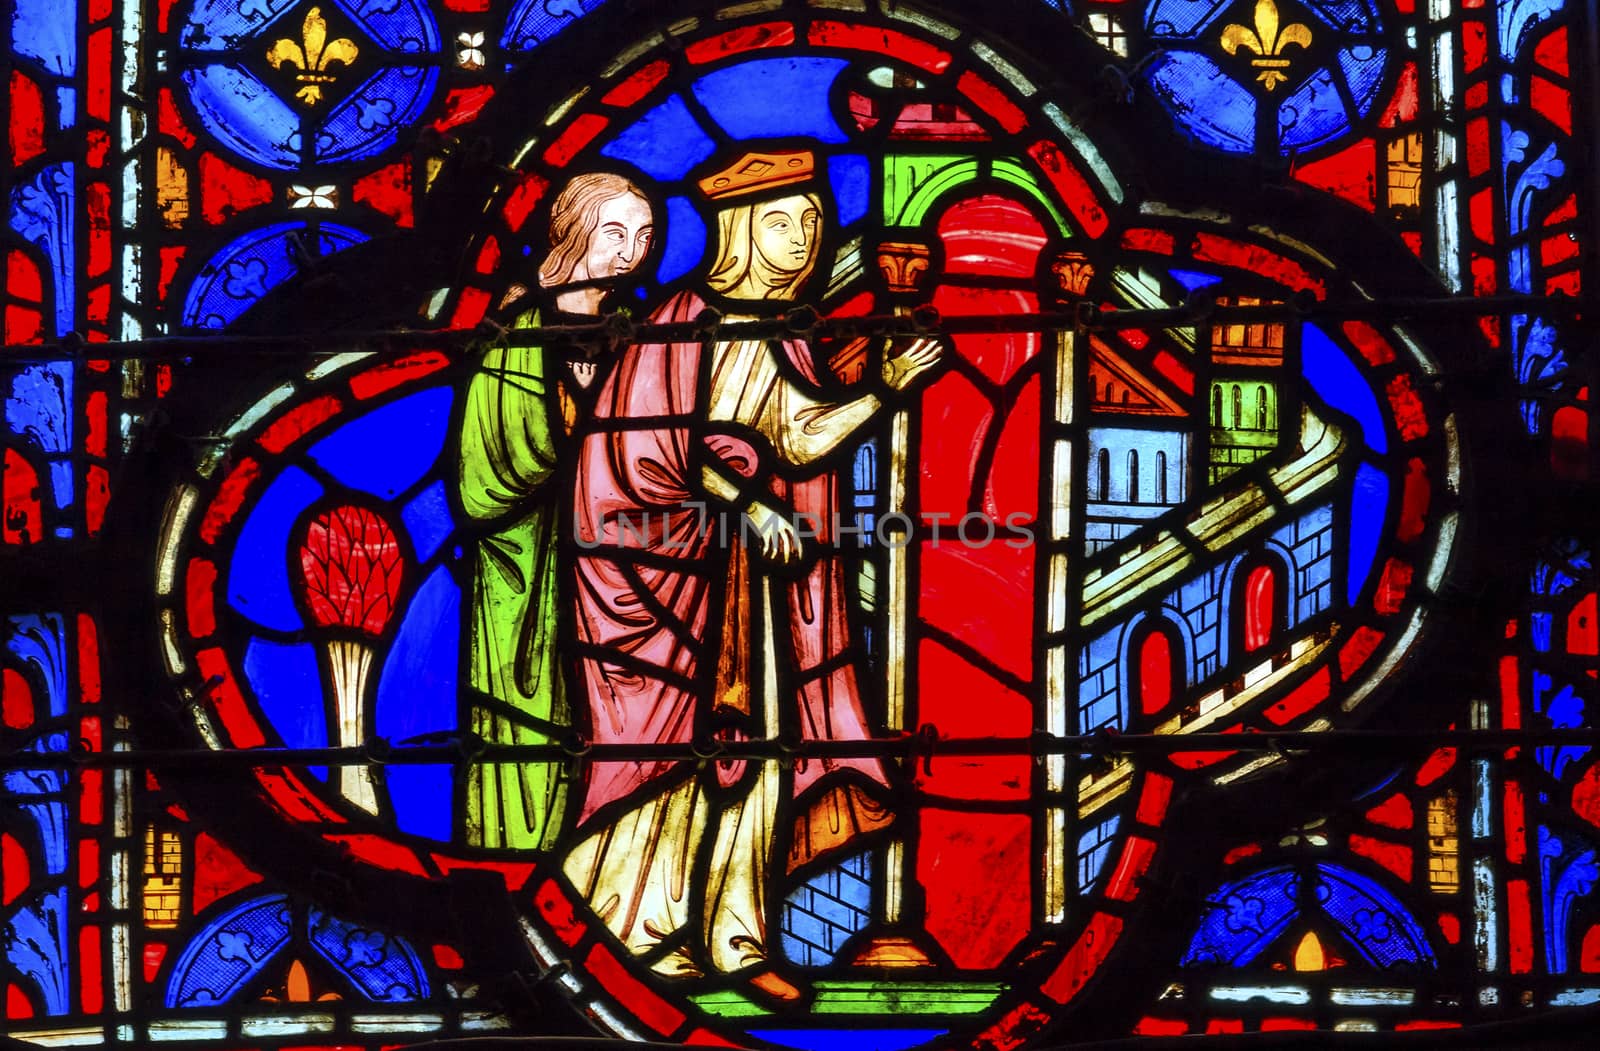 Queen Entering Jerusalem Medieval Life Stained Glass Saint Chapelle Paris France.  Saint King Louis 9th created Sainte Chapelle in 1248 to house Christian relics, including Christ's Crown of Thorns.  Stained Glass created in the 13th Century and shows various biblical stories along with stories from 1200s.